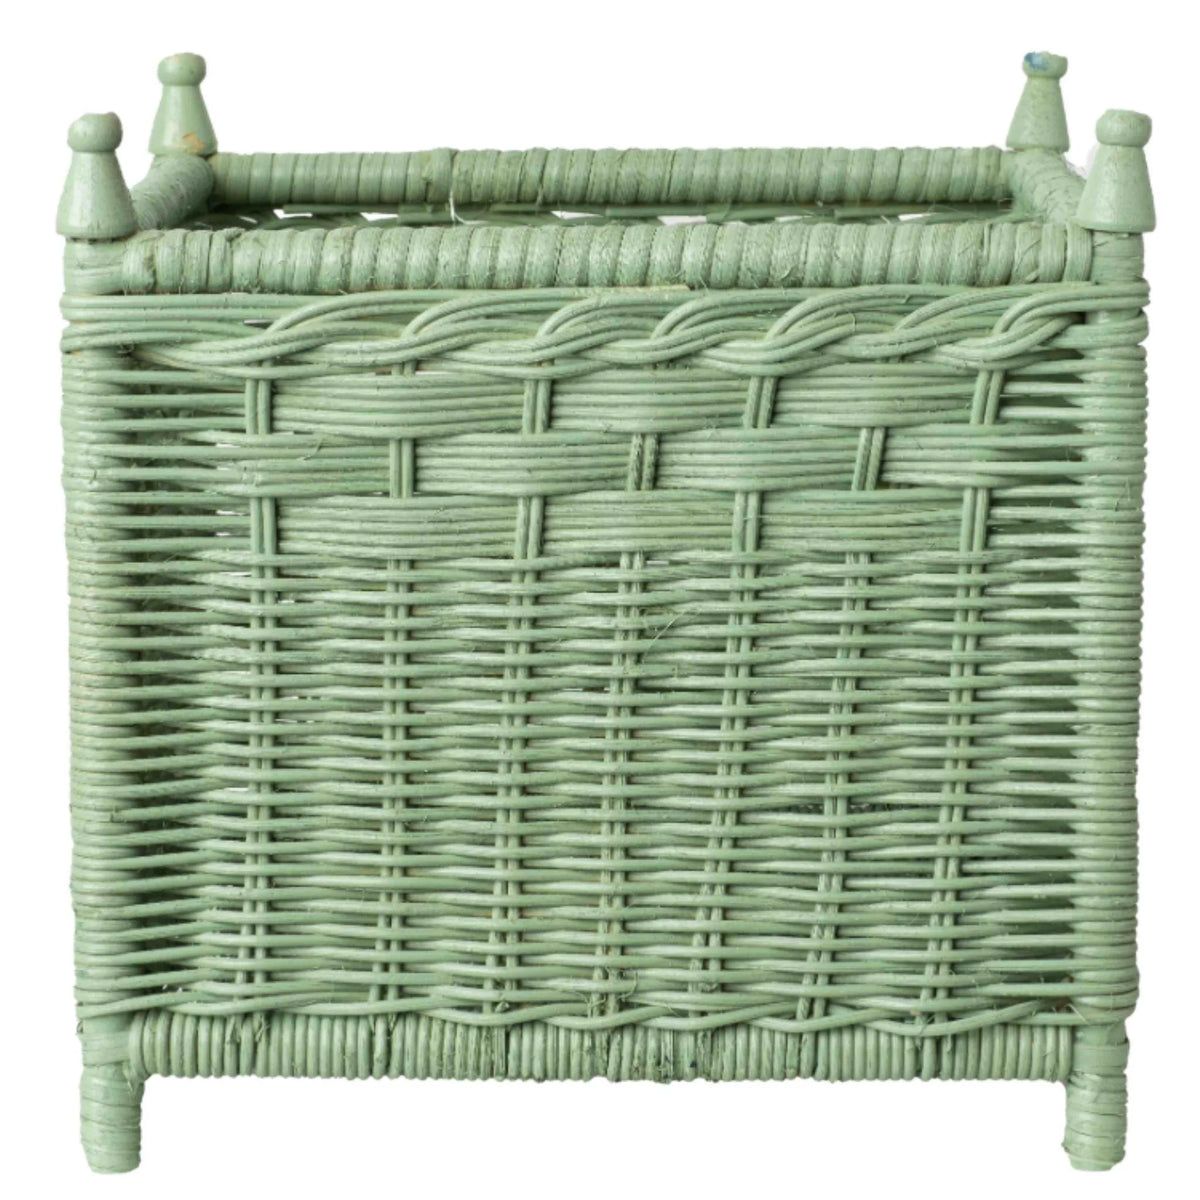 Wicker Box Planters in Leaf Green | The Well Appointed House, LLC